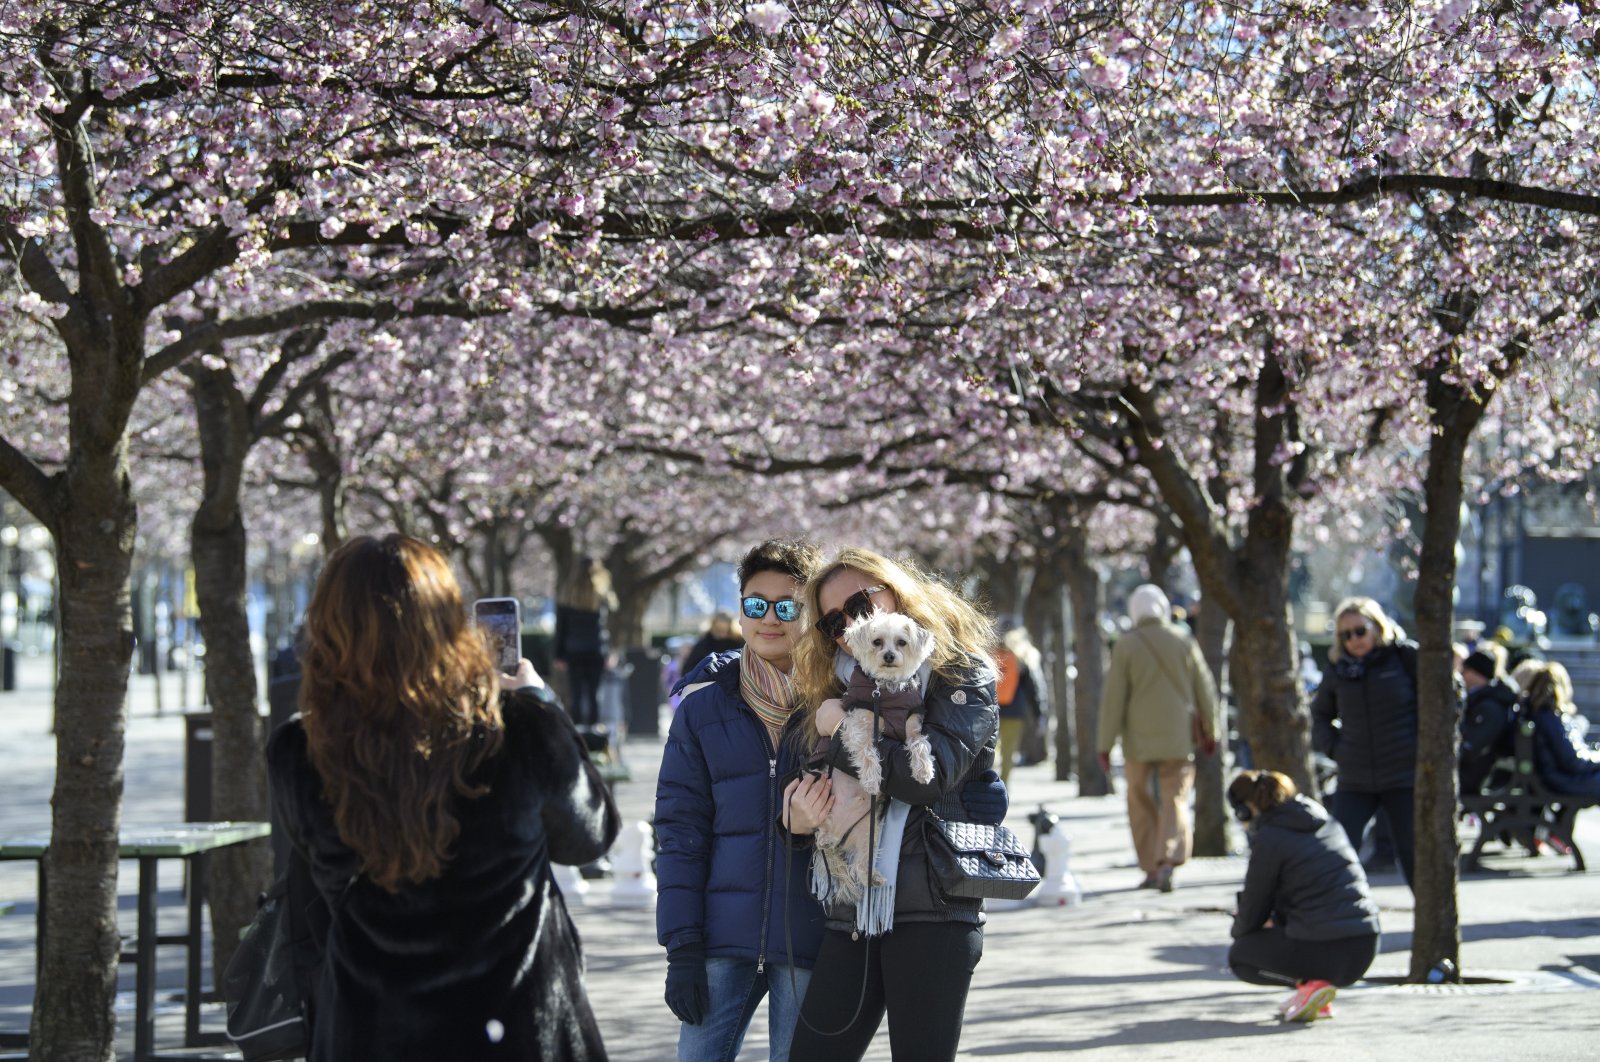 People pose for a photo while strolling with others among the blooming cherry trees in Kungstradgarden park, Stockholm, March 22, 2020. (AP Photo)